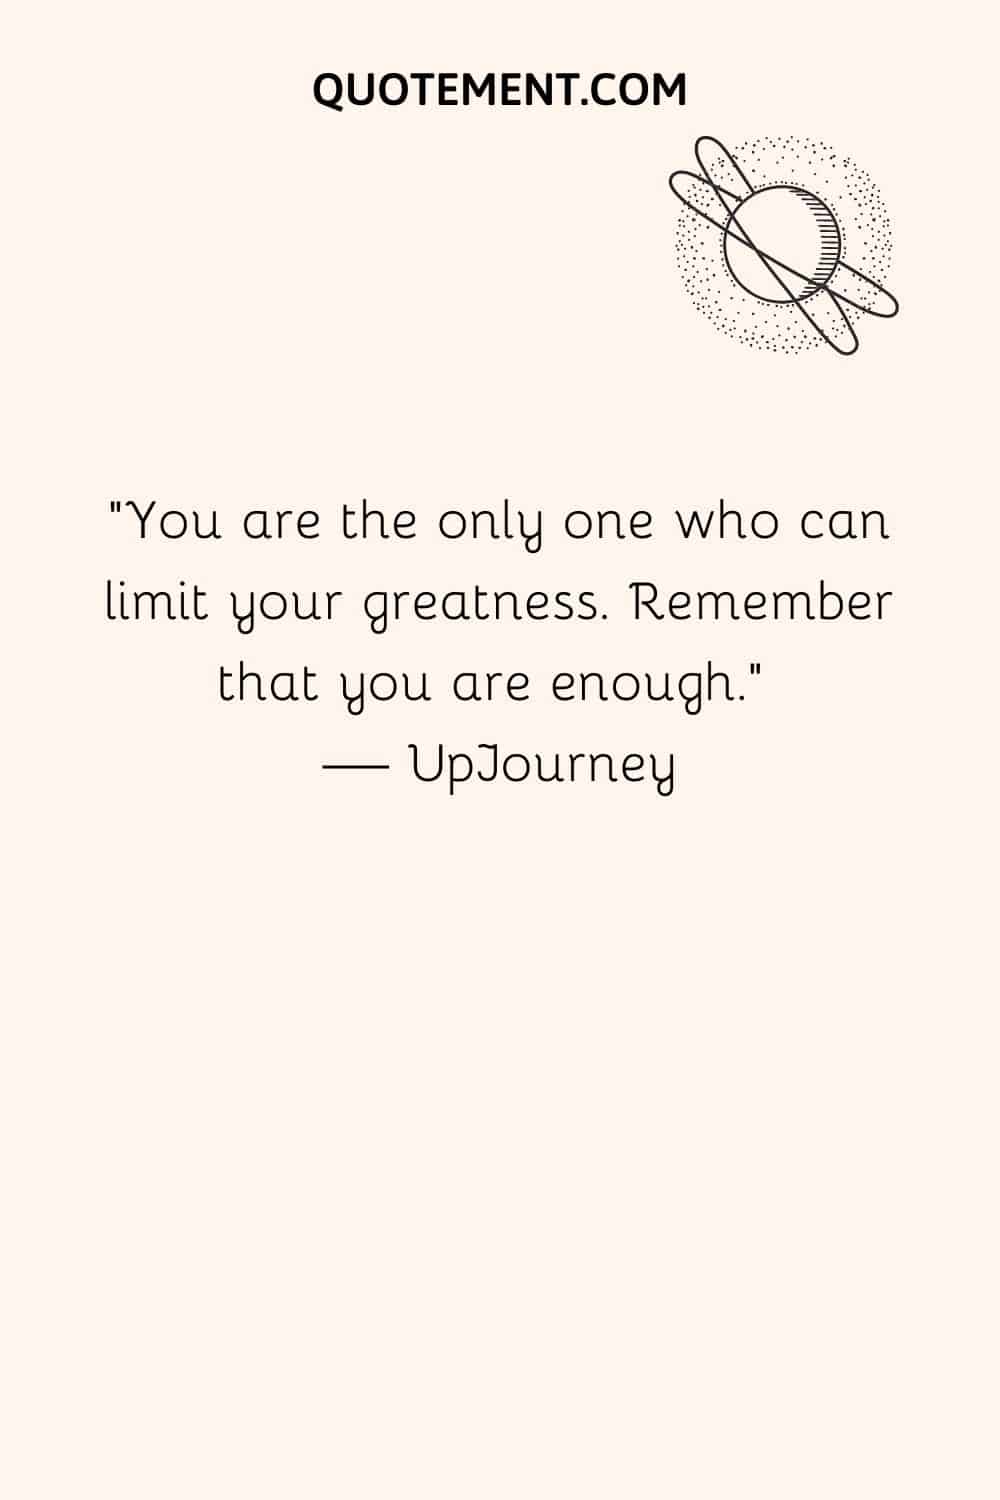 You are the only one who can limit your greatness. Remember that you are enough